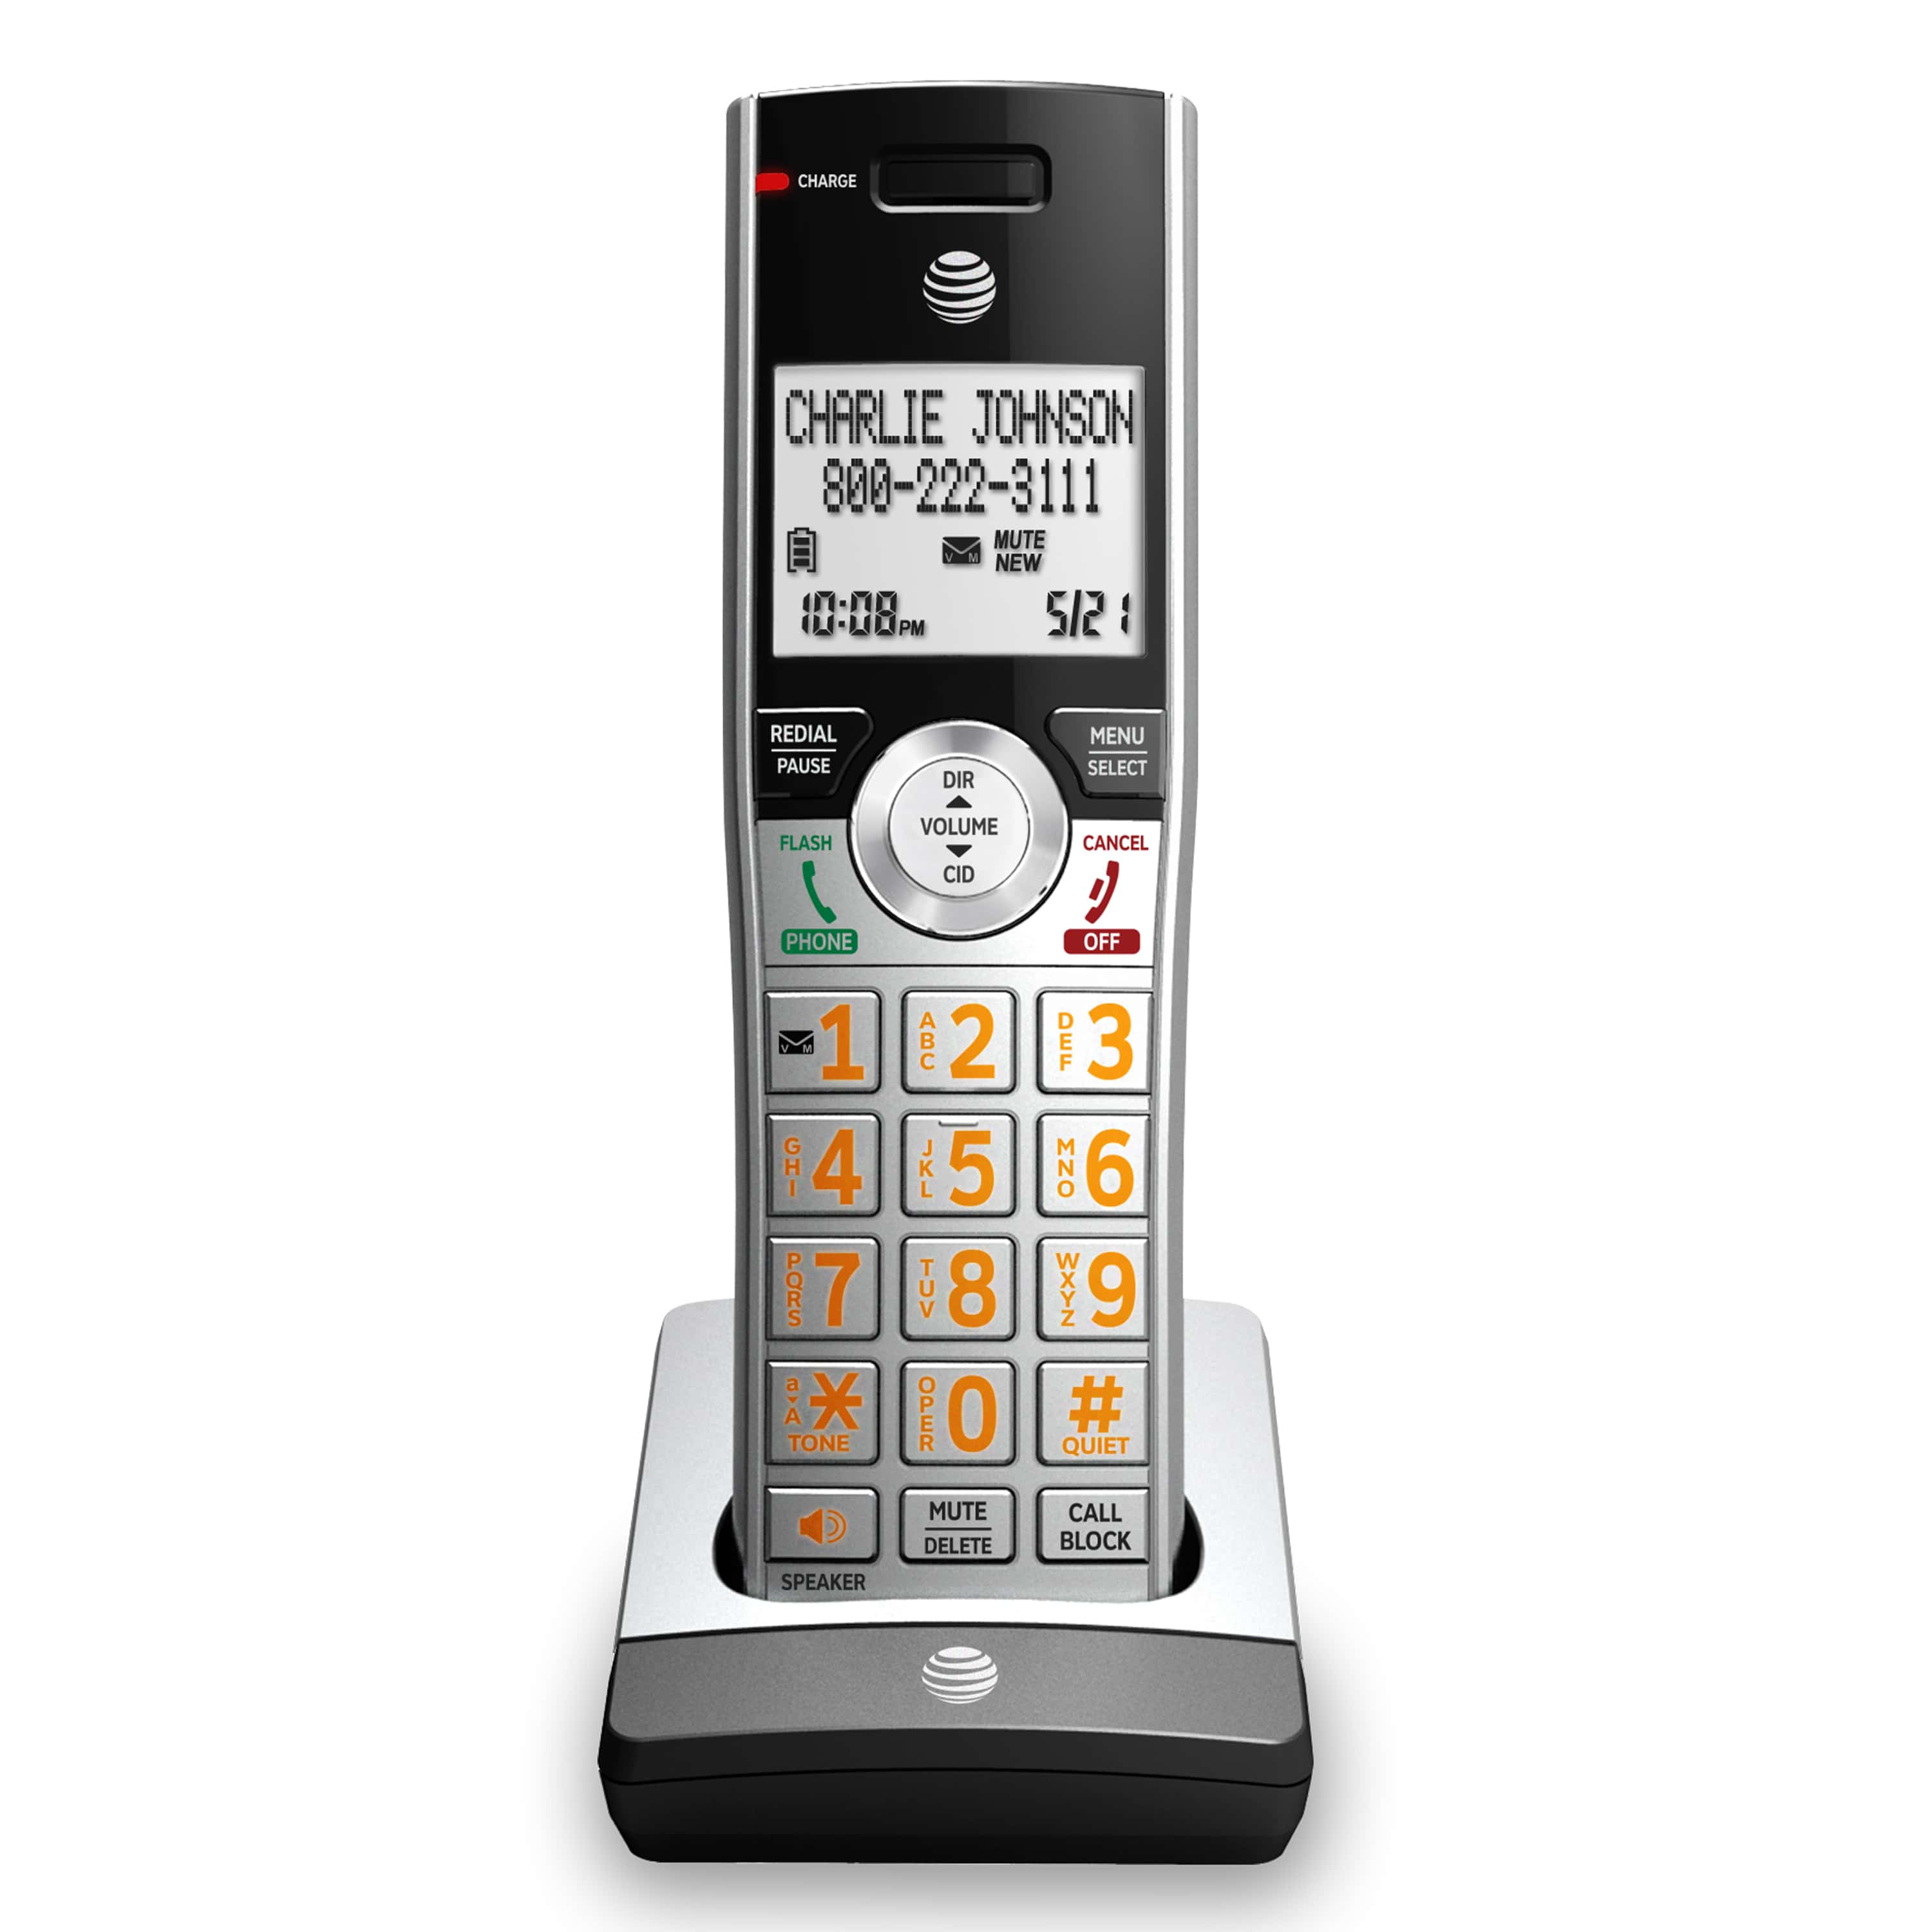 Cordless Accessory Handset for AT&T CL82207, CL82267, CL82307, CL82367, CL82407, CL83207, CL83407, CL84107, and CL84207 - view 1